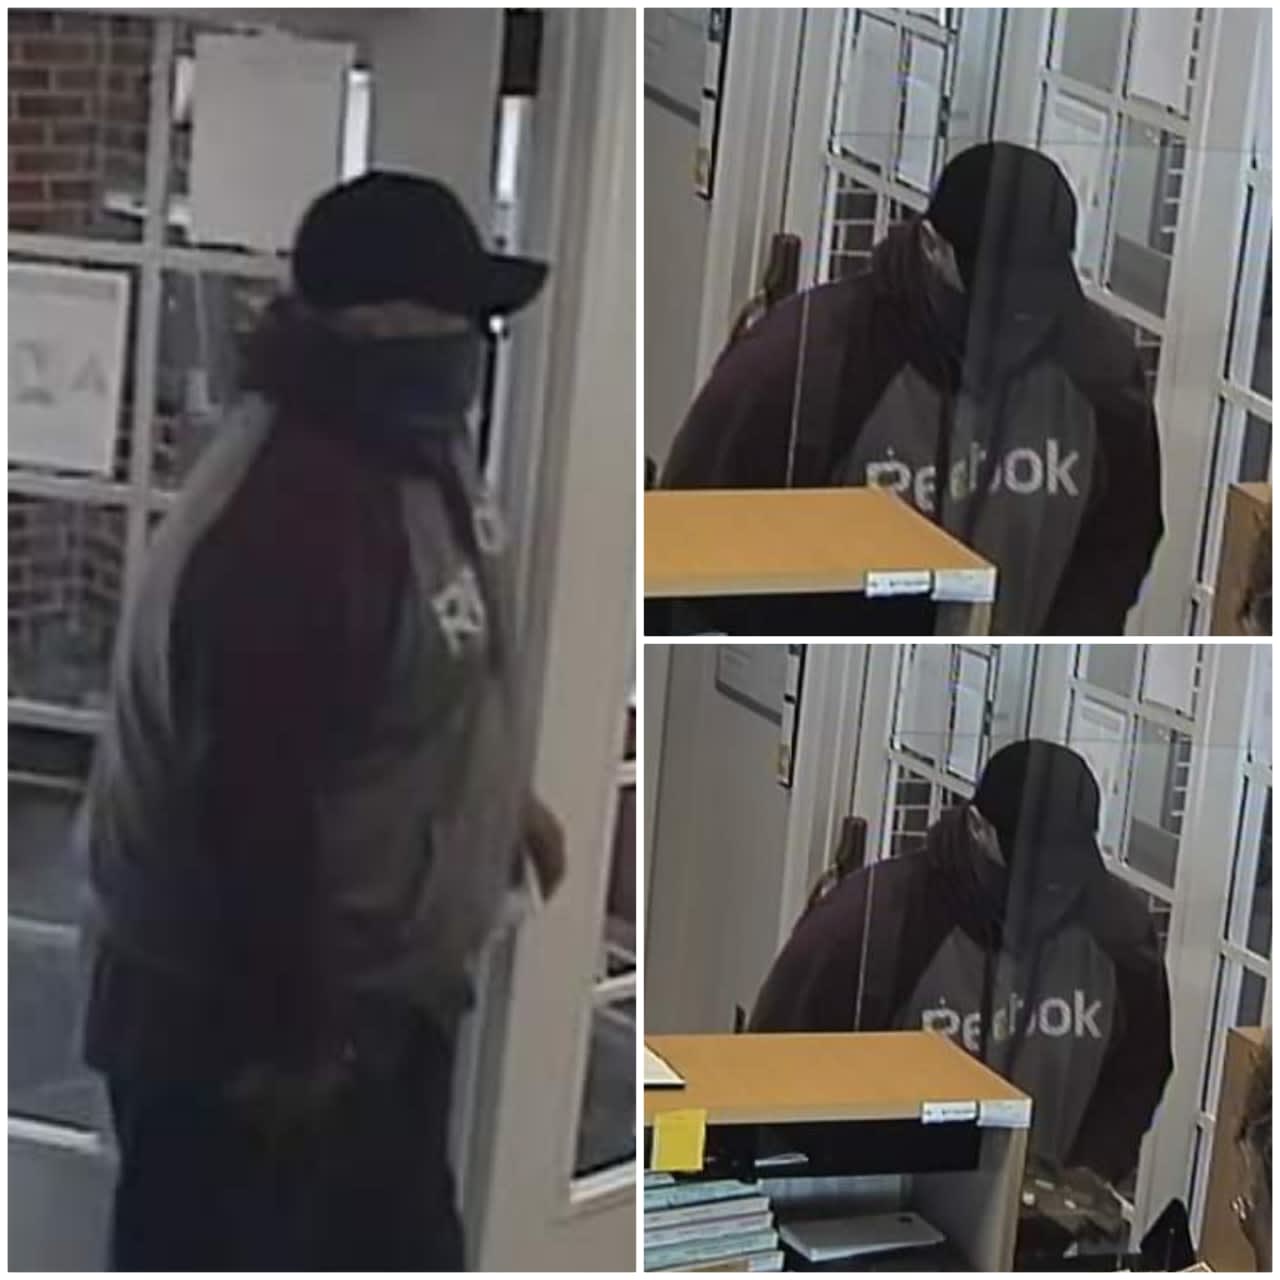 Suspected BB&T robber.